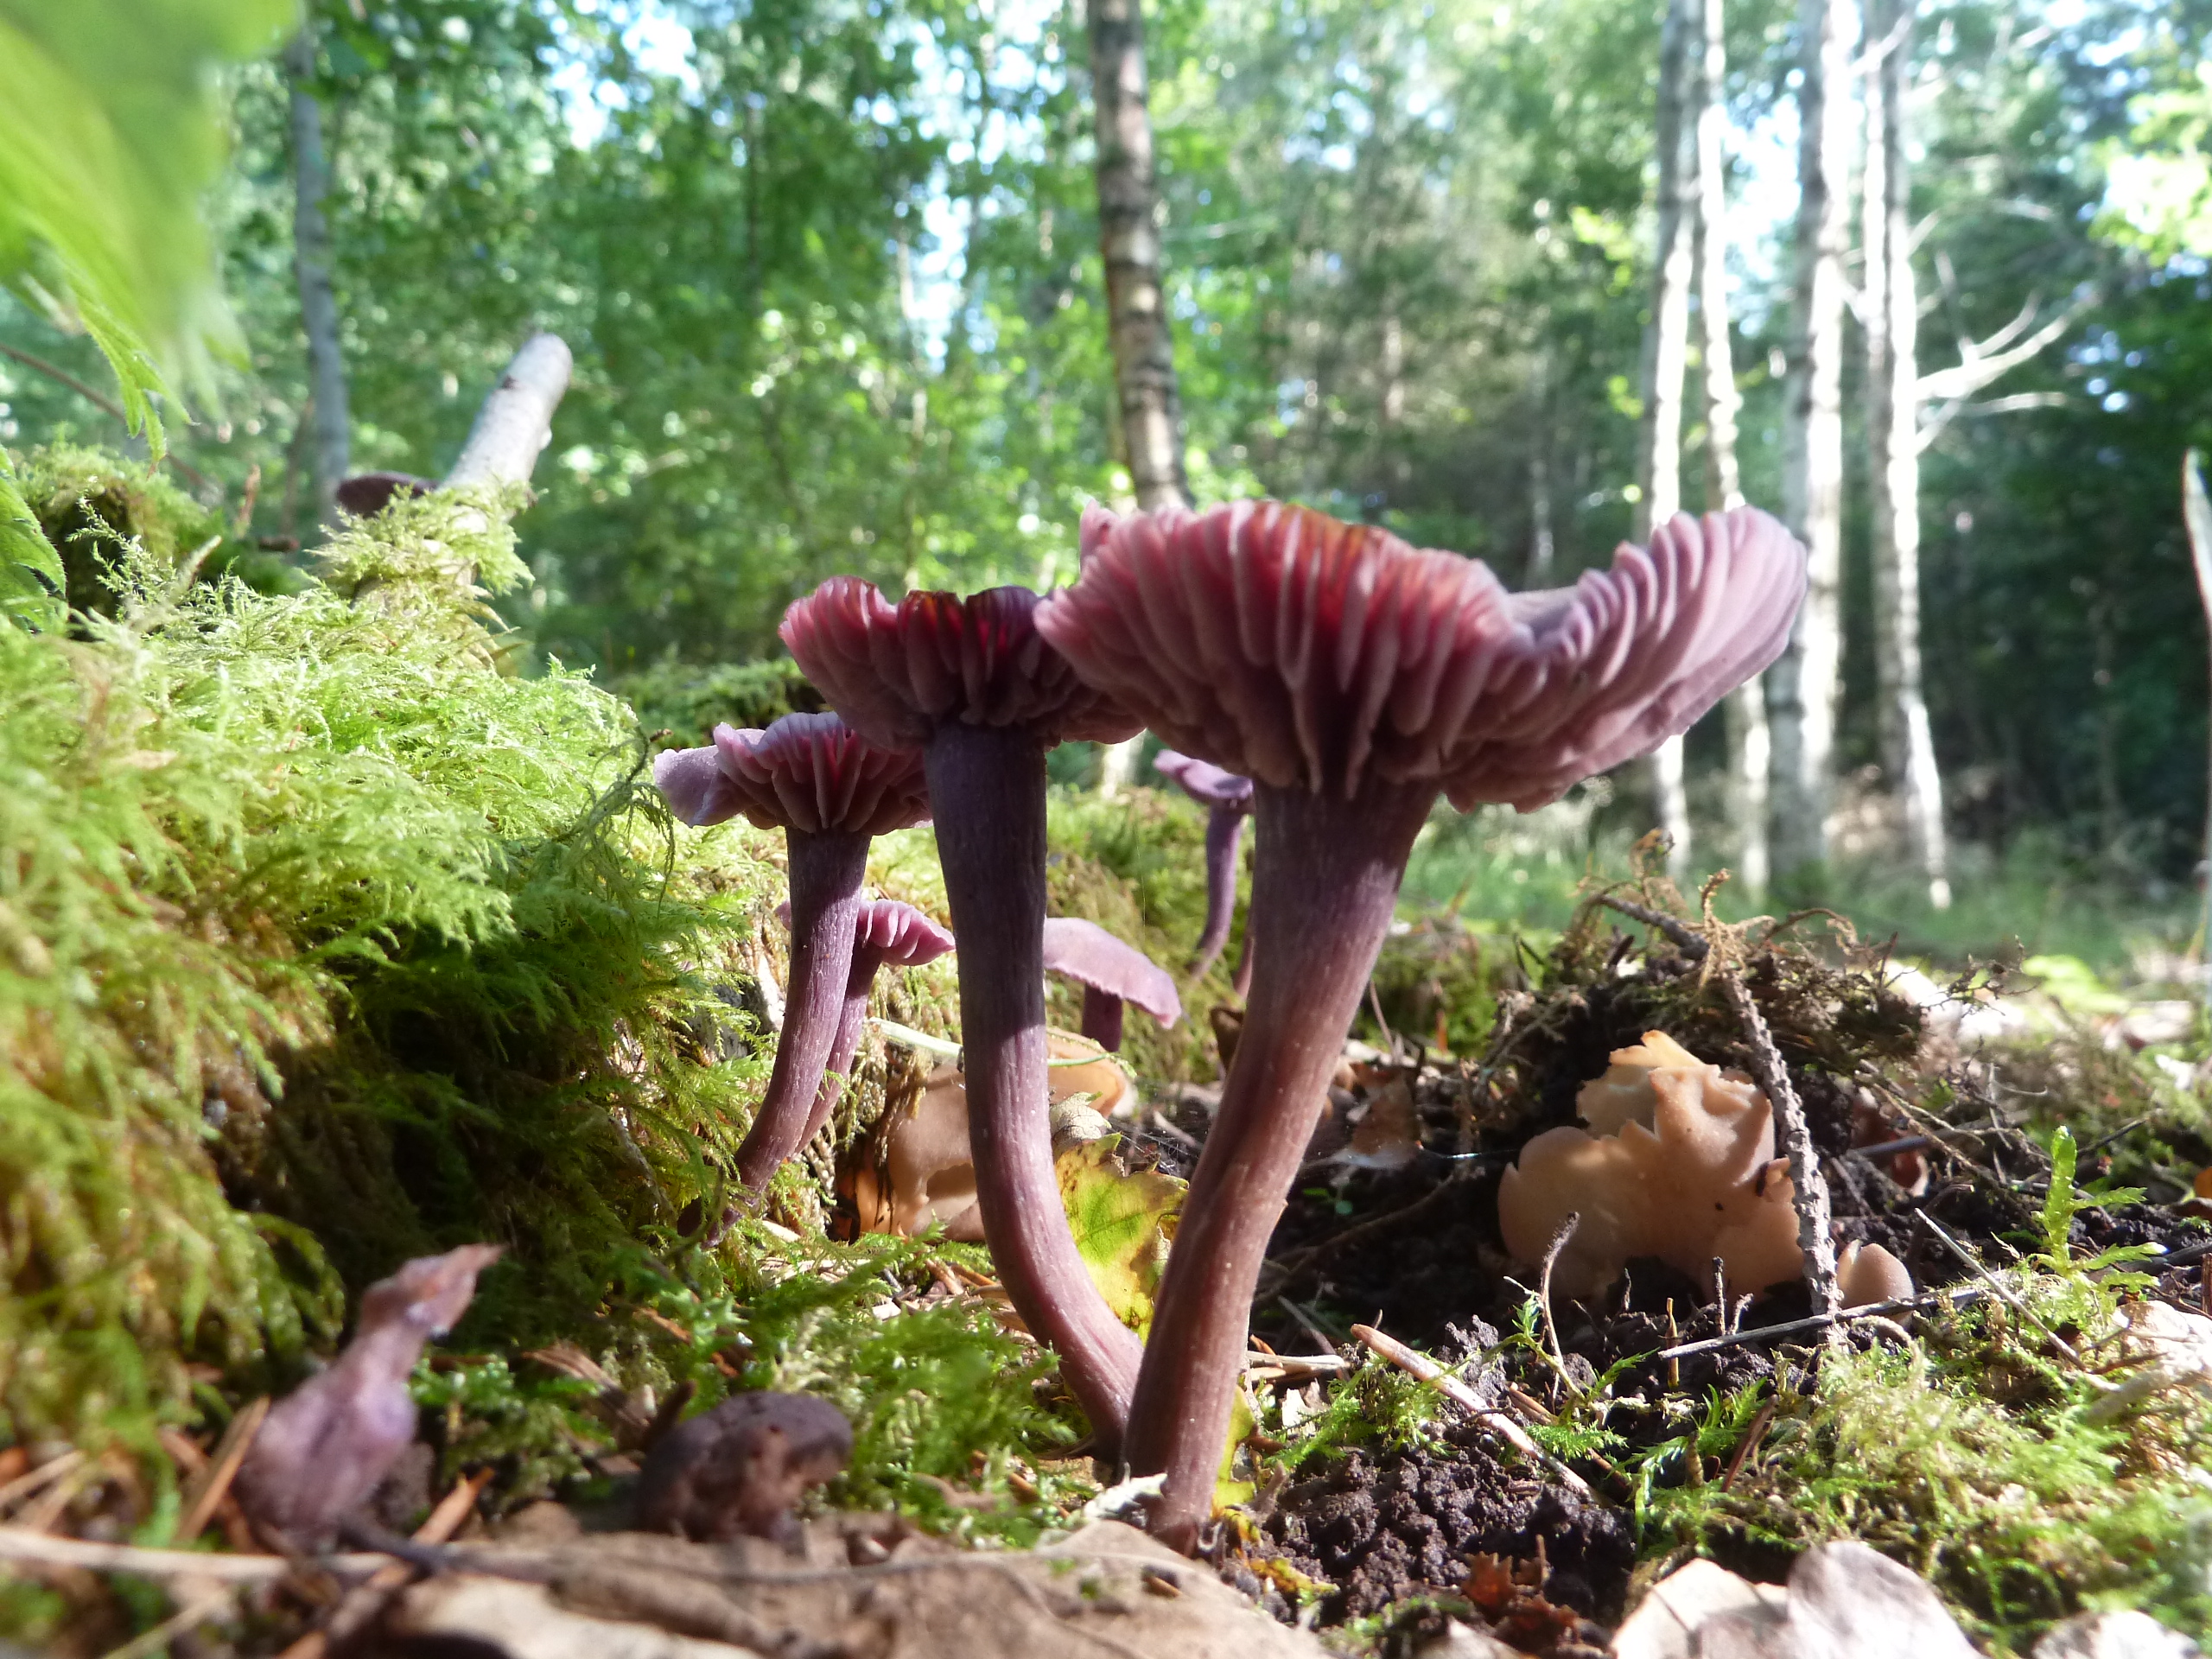 Mushrooms in a sustainably managed forest.